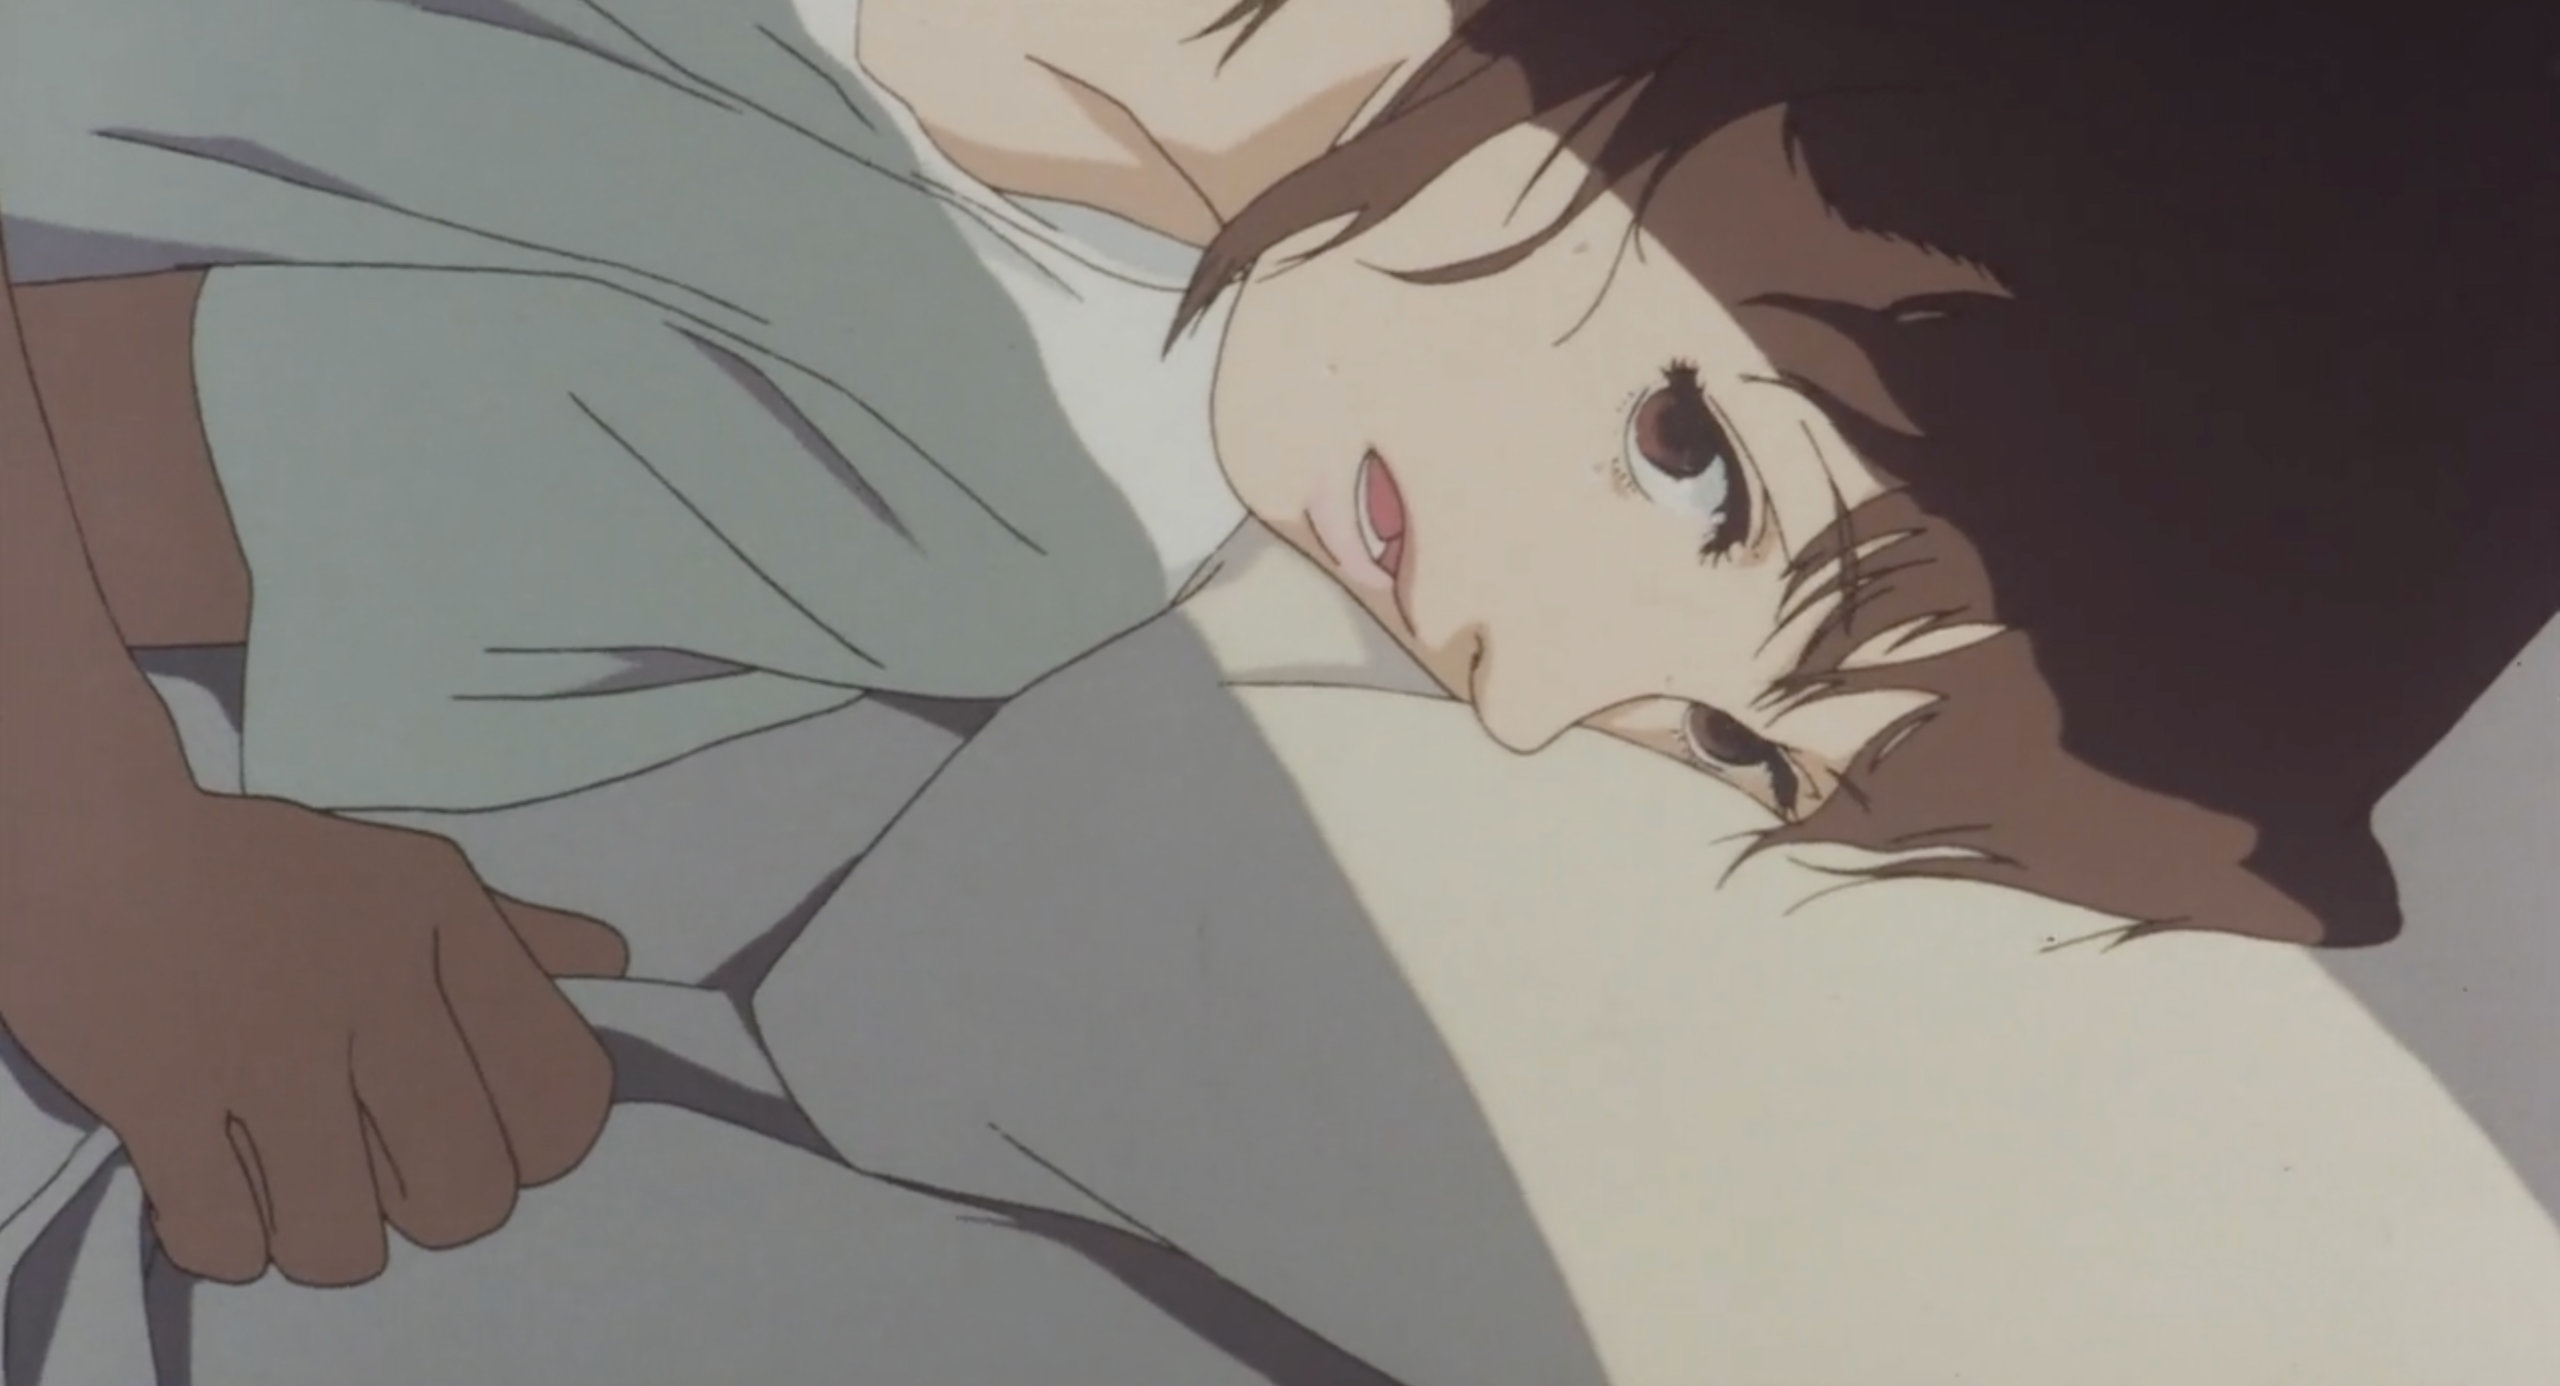 Mima wakes up after the photographer is murdered in Perfect Blue